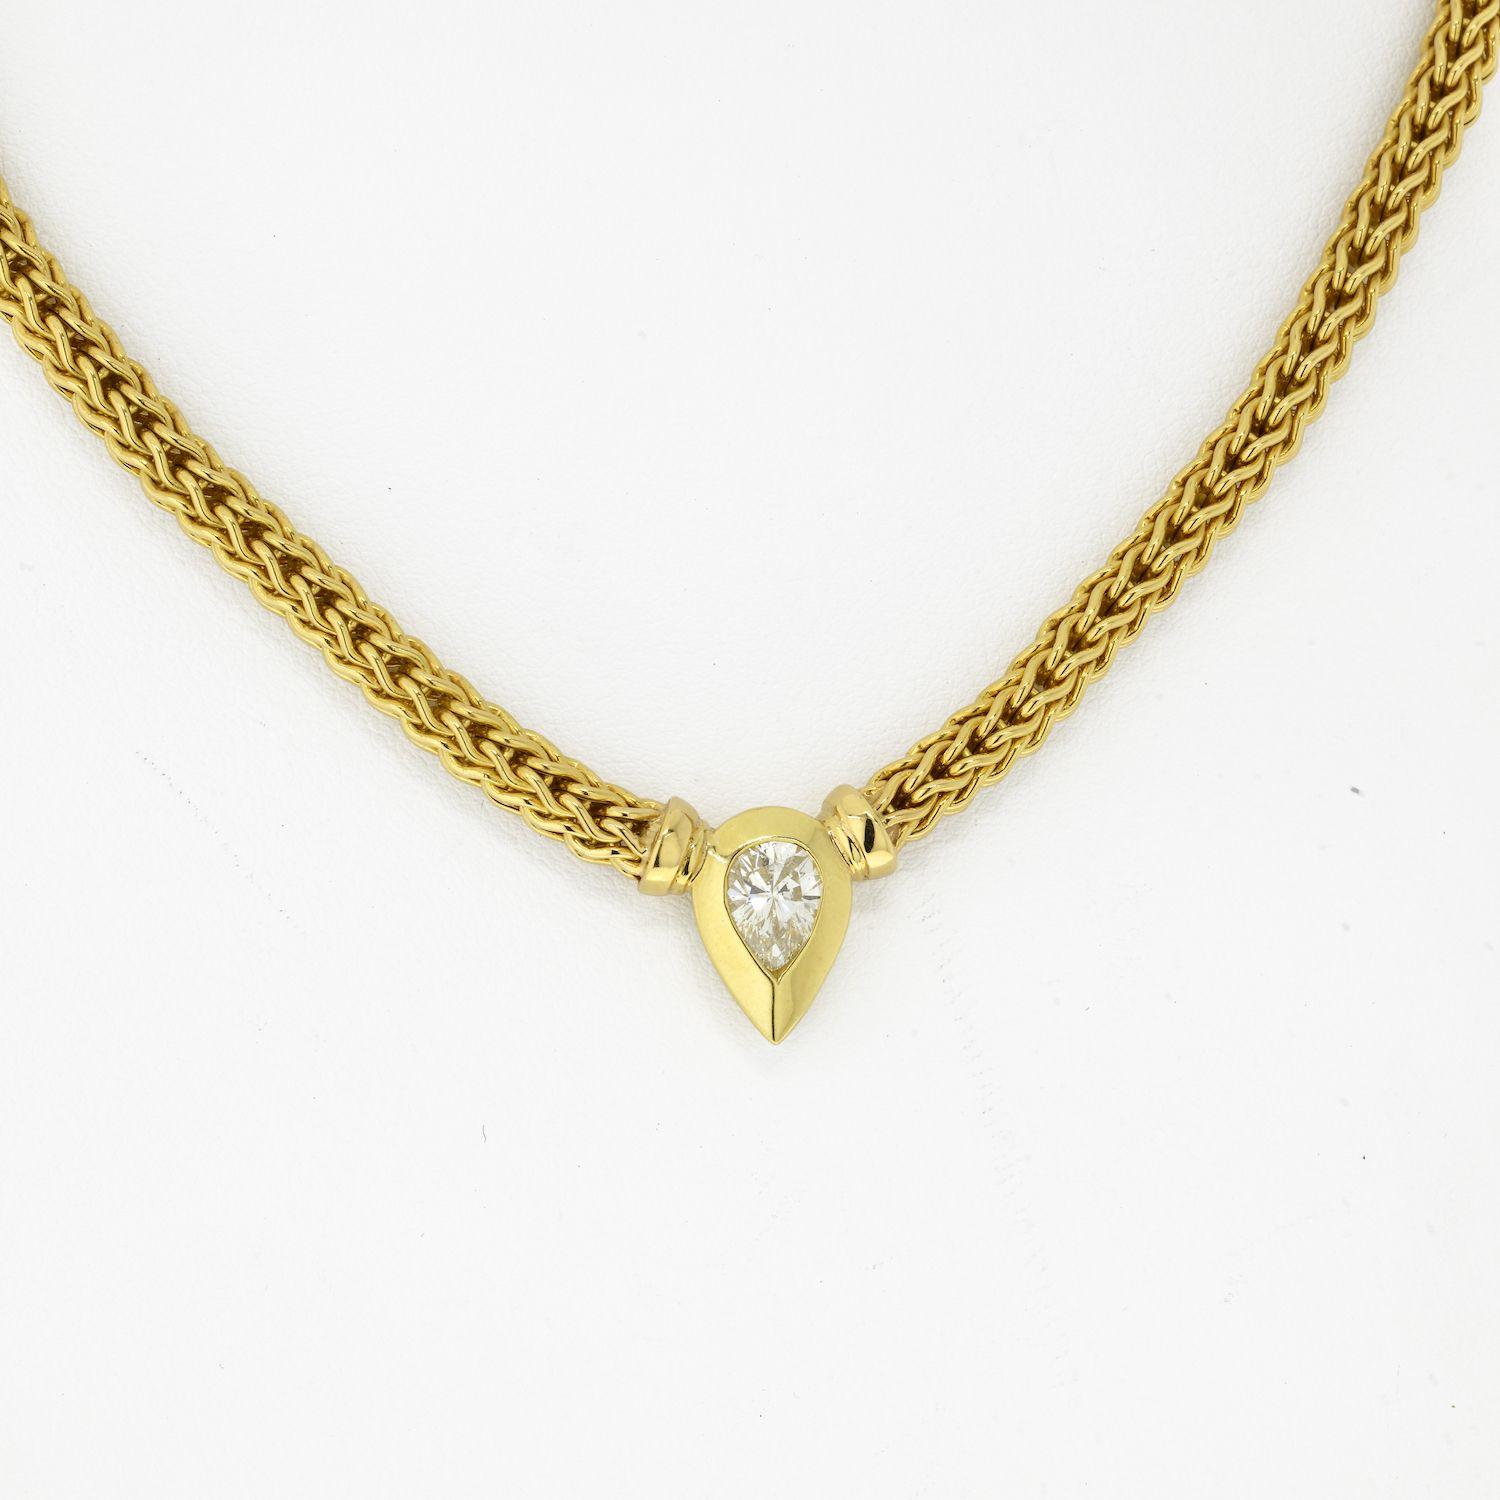 The polishing on this 18k yellow gold Italian basket weave chain is perfect. It feels like silk, it's so smooth and comfortable! 
This chain is 100% Italian 18K pure gold and measures 17 inches long. Lovely pear cut diamond is bezel set as a tear